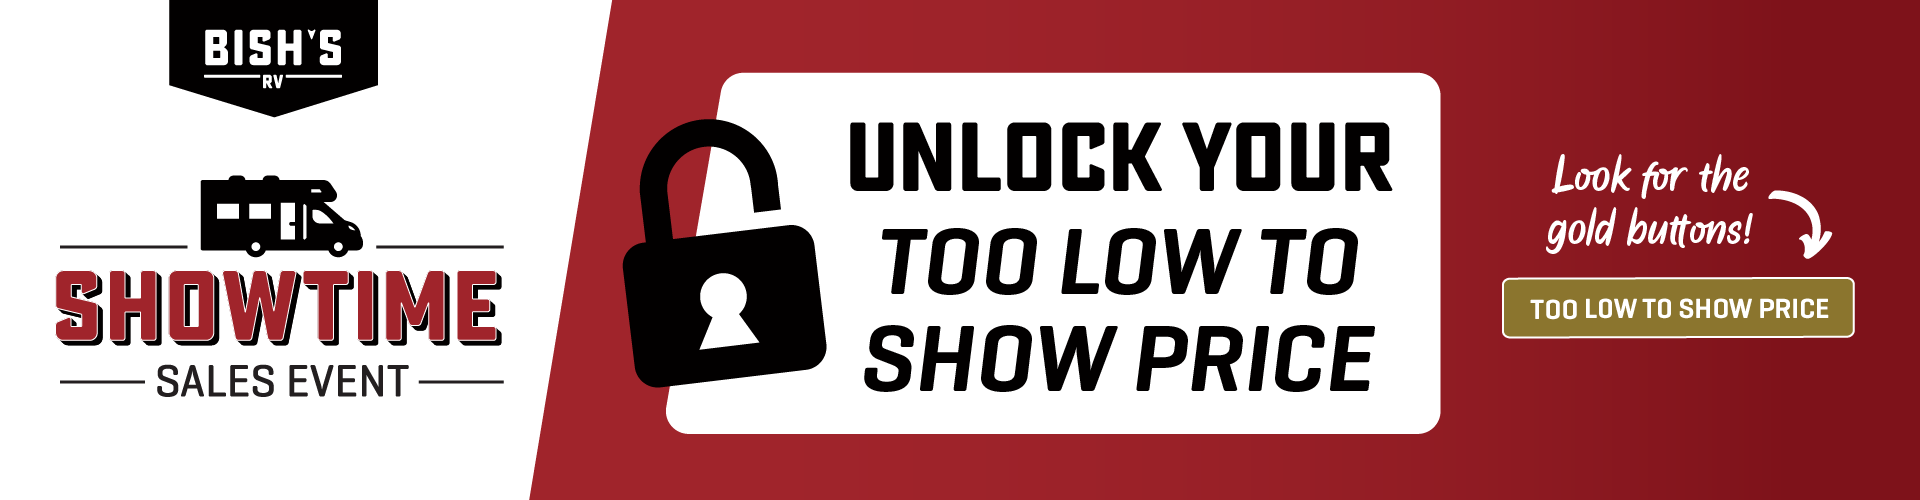 Showtime Sales Event - Unlock Your Too Low To Show Price